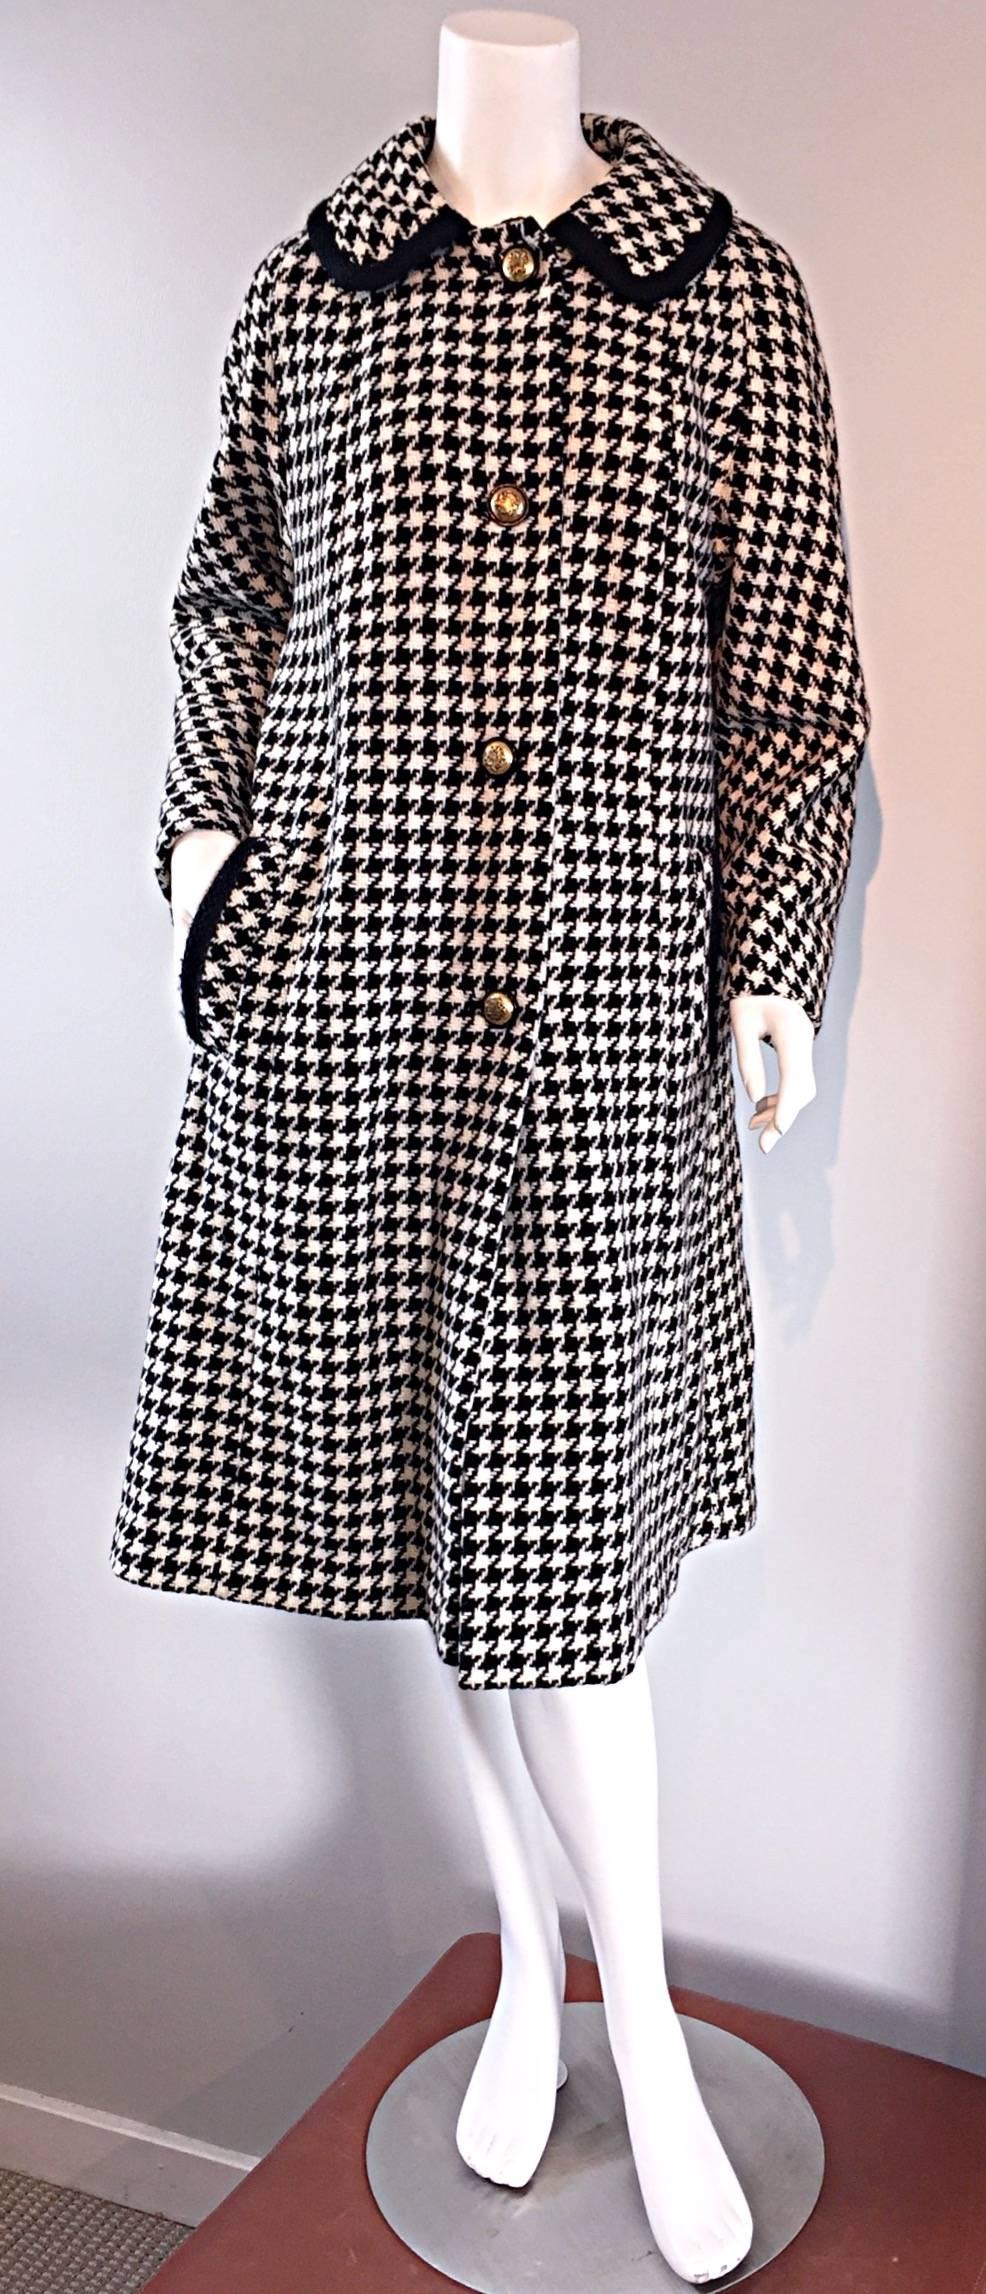 Adorable 1960s 60s Black and White Hounstooth Vintage Wool Swing Jacket / Coat 3